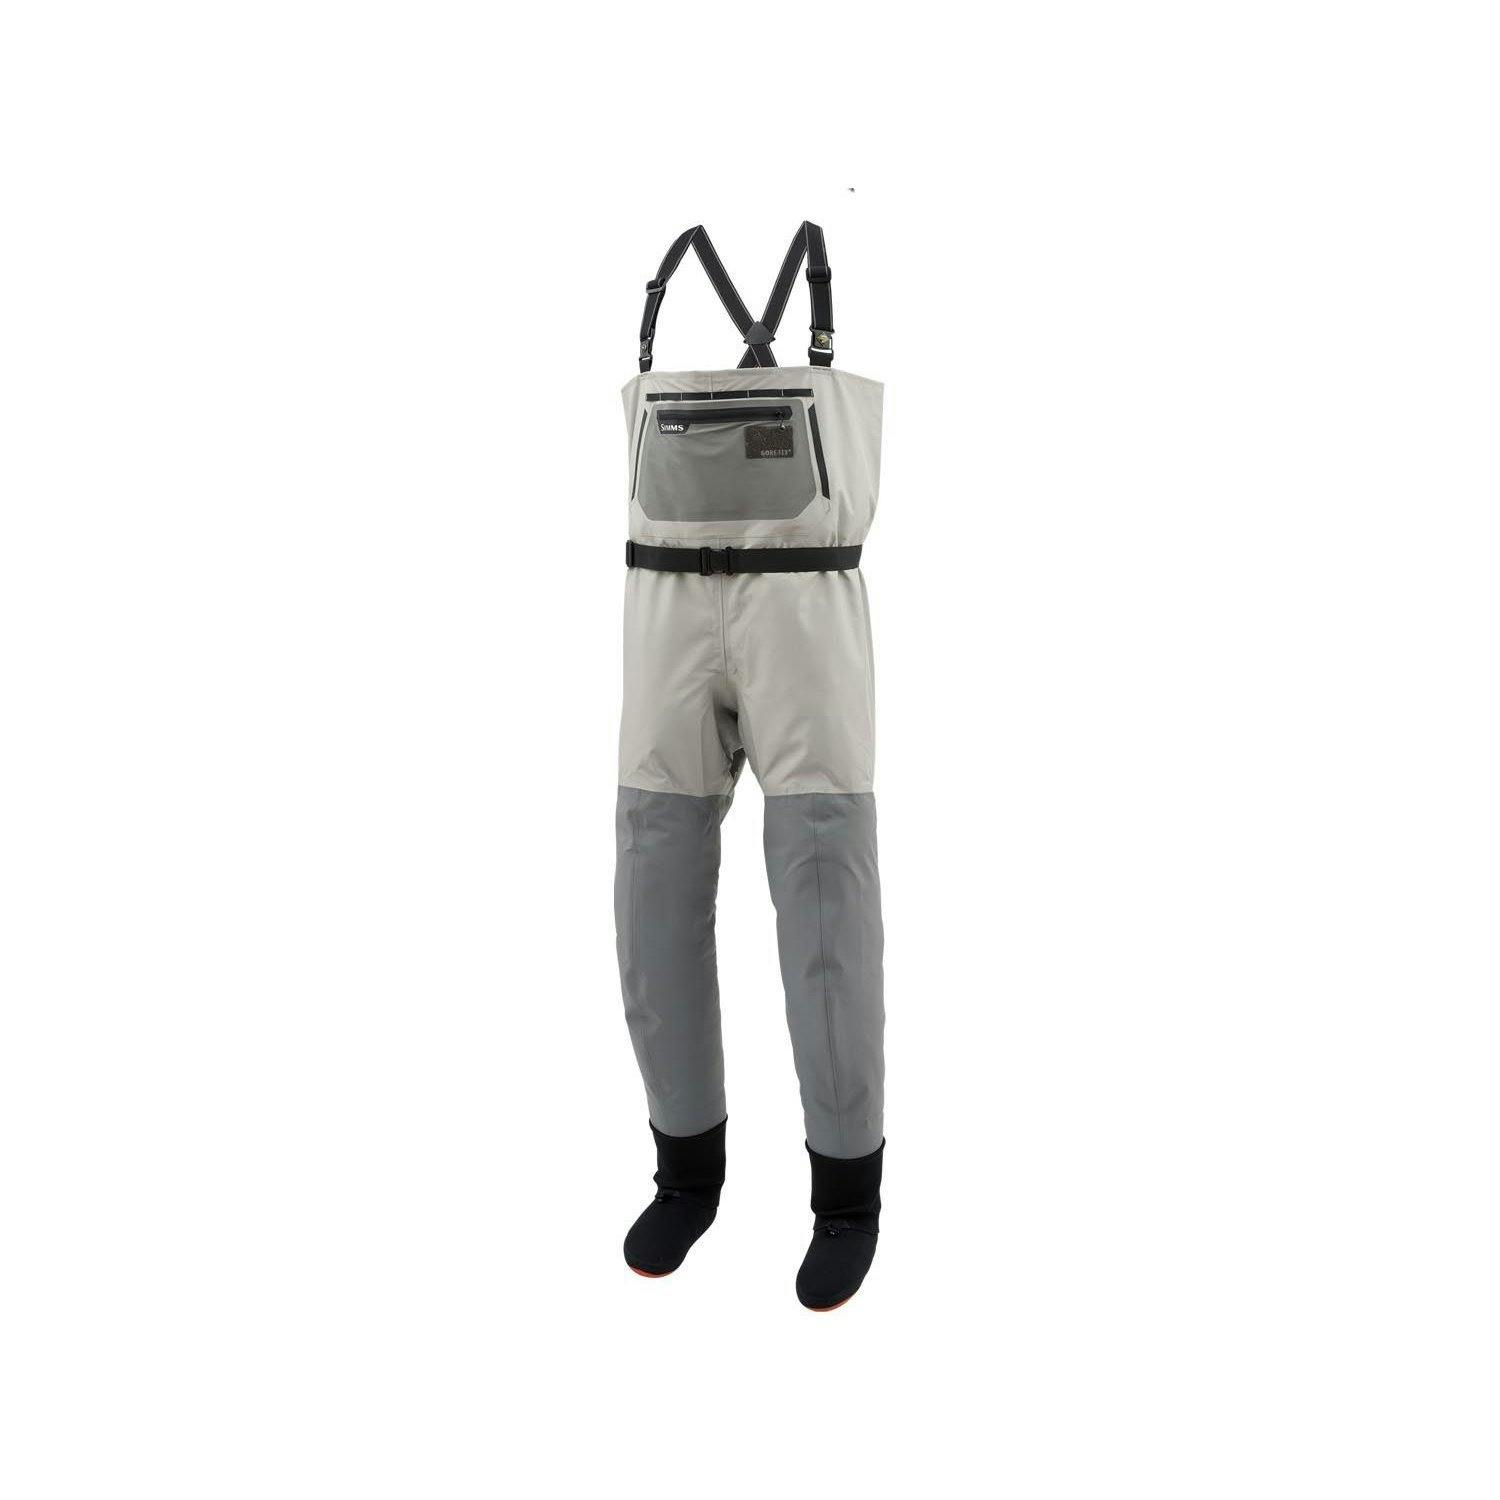 Simms Headwaters Pro Waders